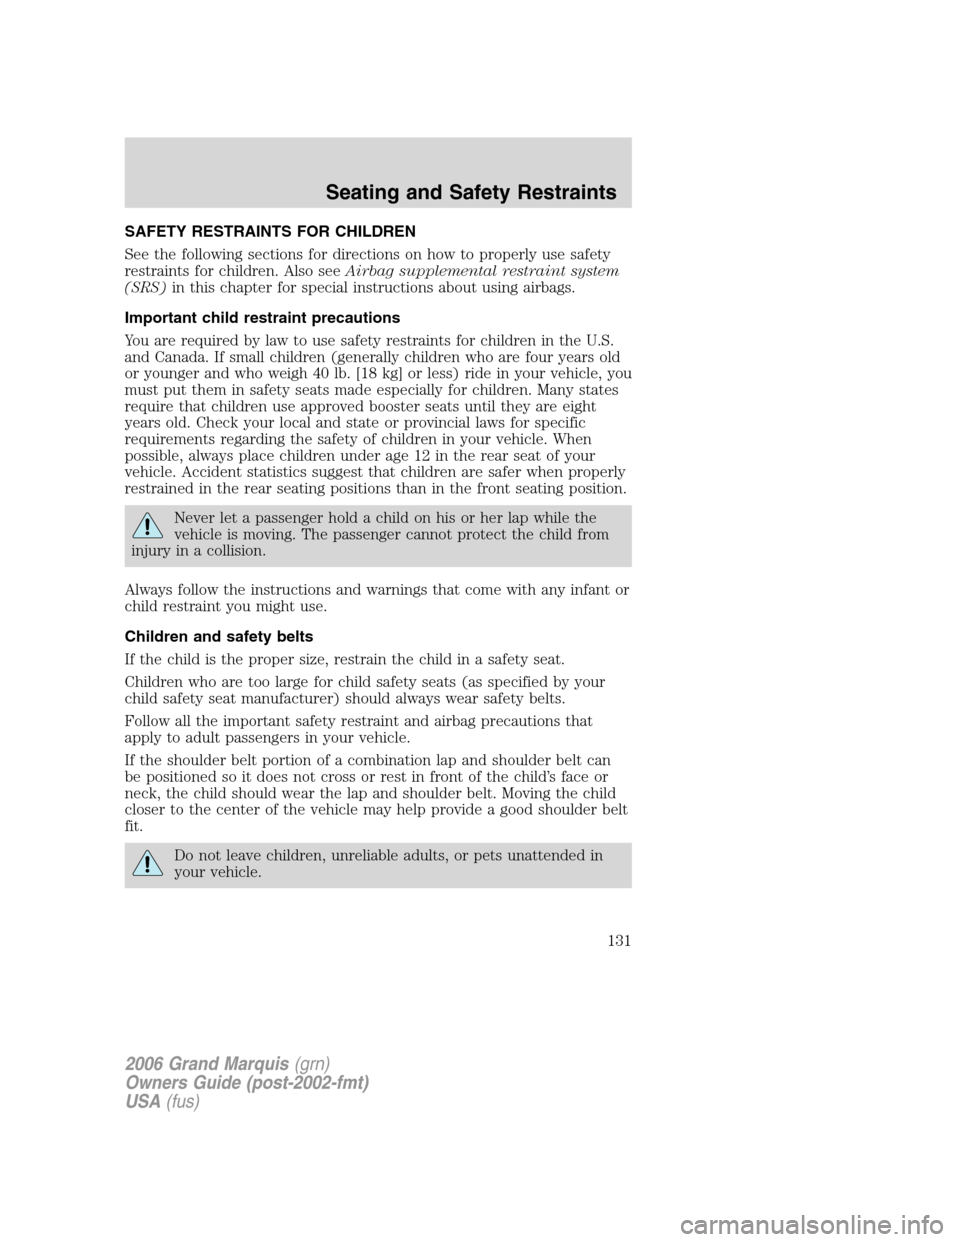 Mercury Grand Marquis 2006  Owners Manuals SAFETY RESTRAINTS FOR CHILDREN
See the following sections for directions on how to properly use safety
restraints for children. Also seeAirbag supplemental restraint system
(SRS)in this chapter for sp